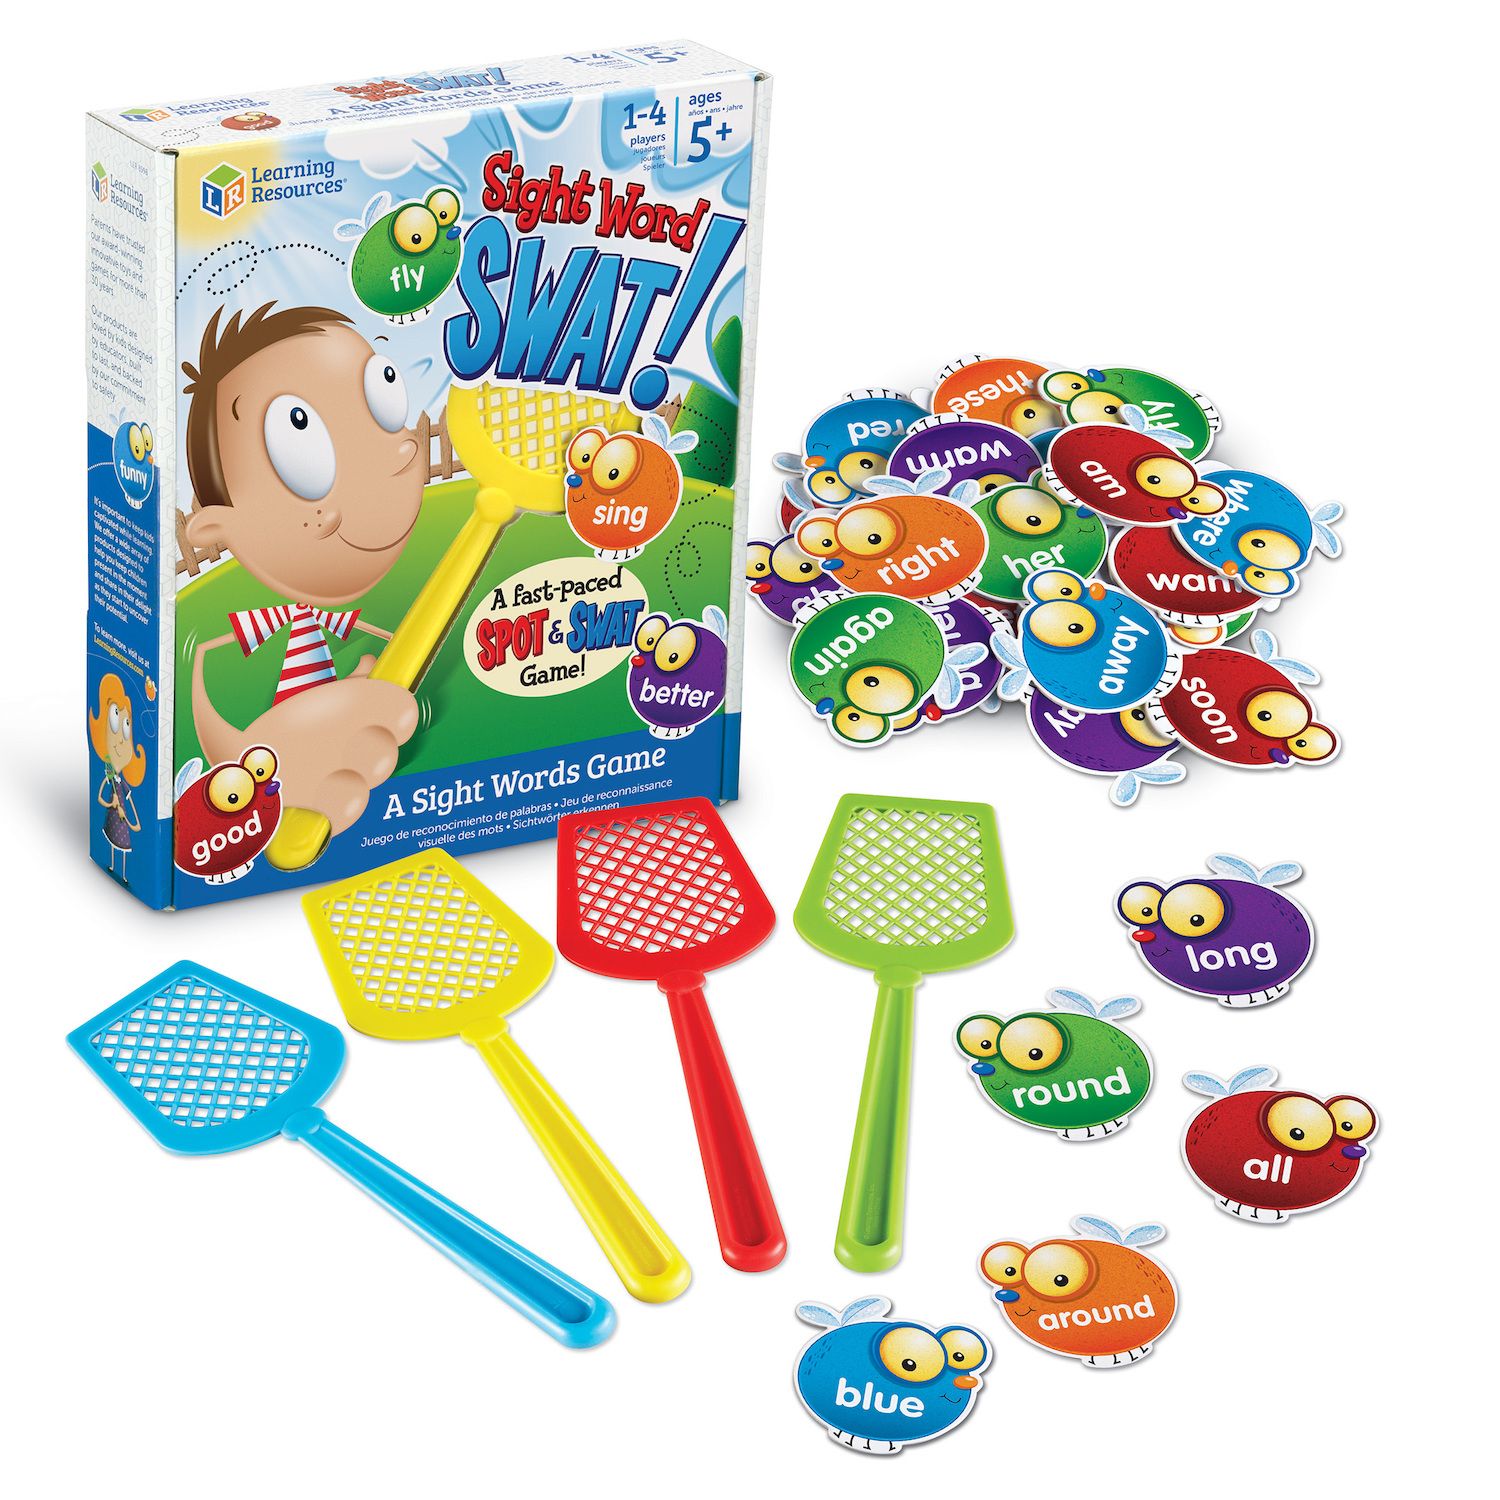 Image for Learning Resources Sight Words Swat! A Sight Words Game at Kohl's.